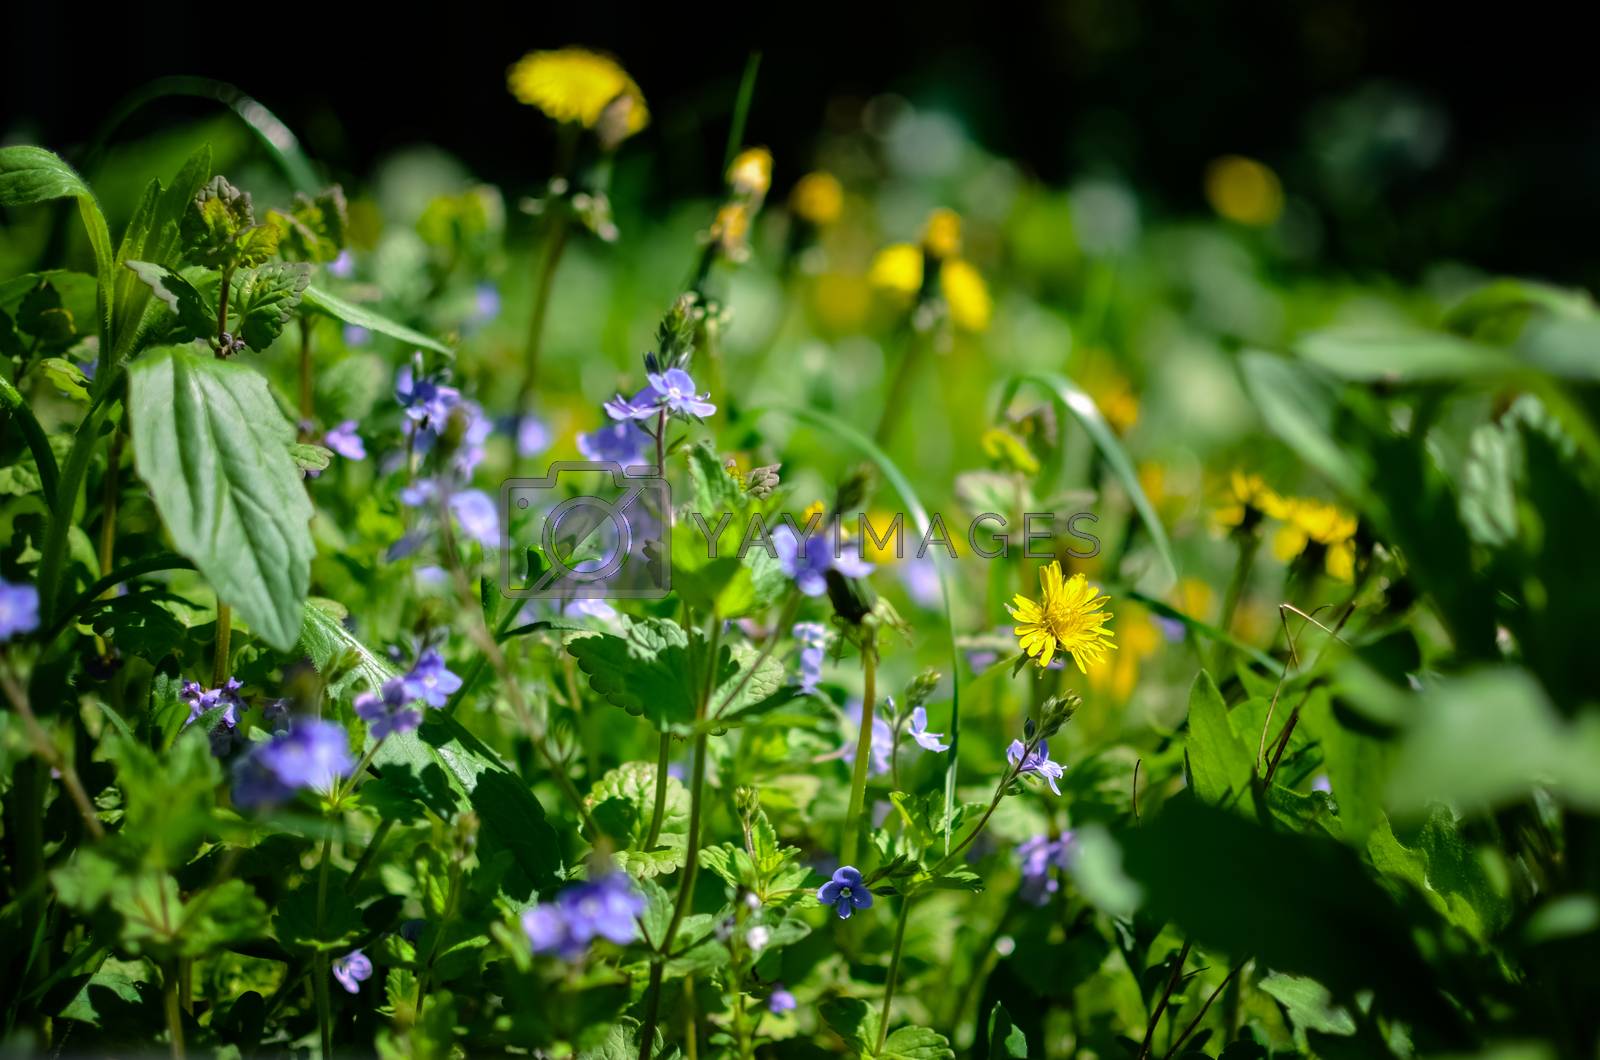 Royalty free image of Background with fresh blue and yellow spring flowers by kimbo-bo